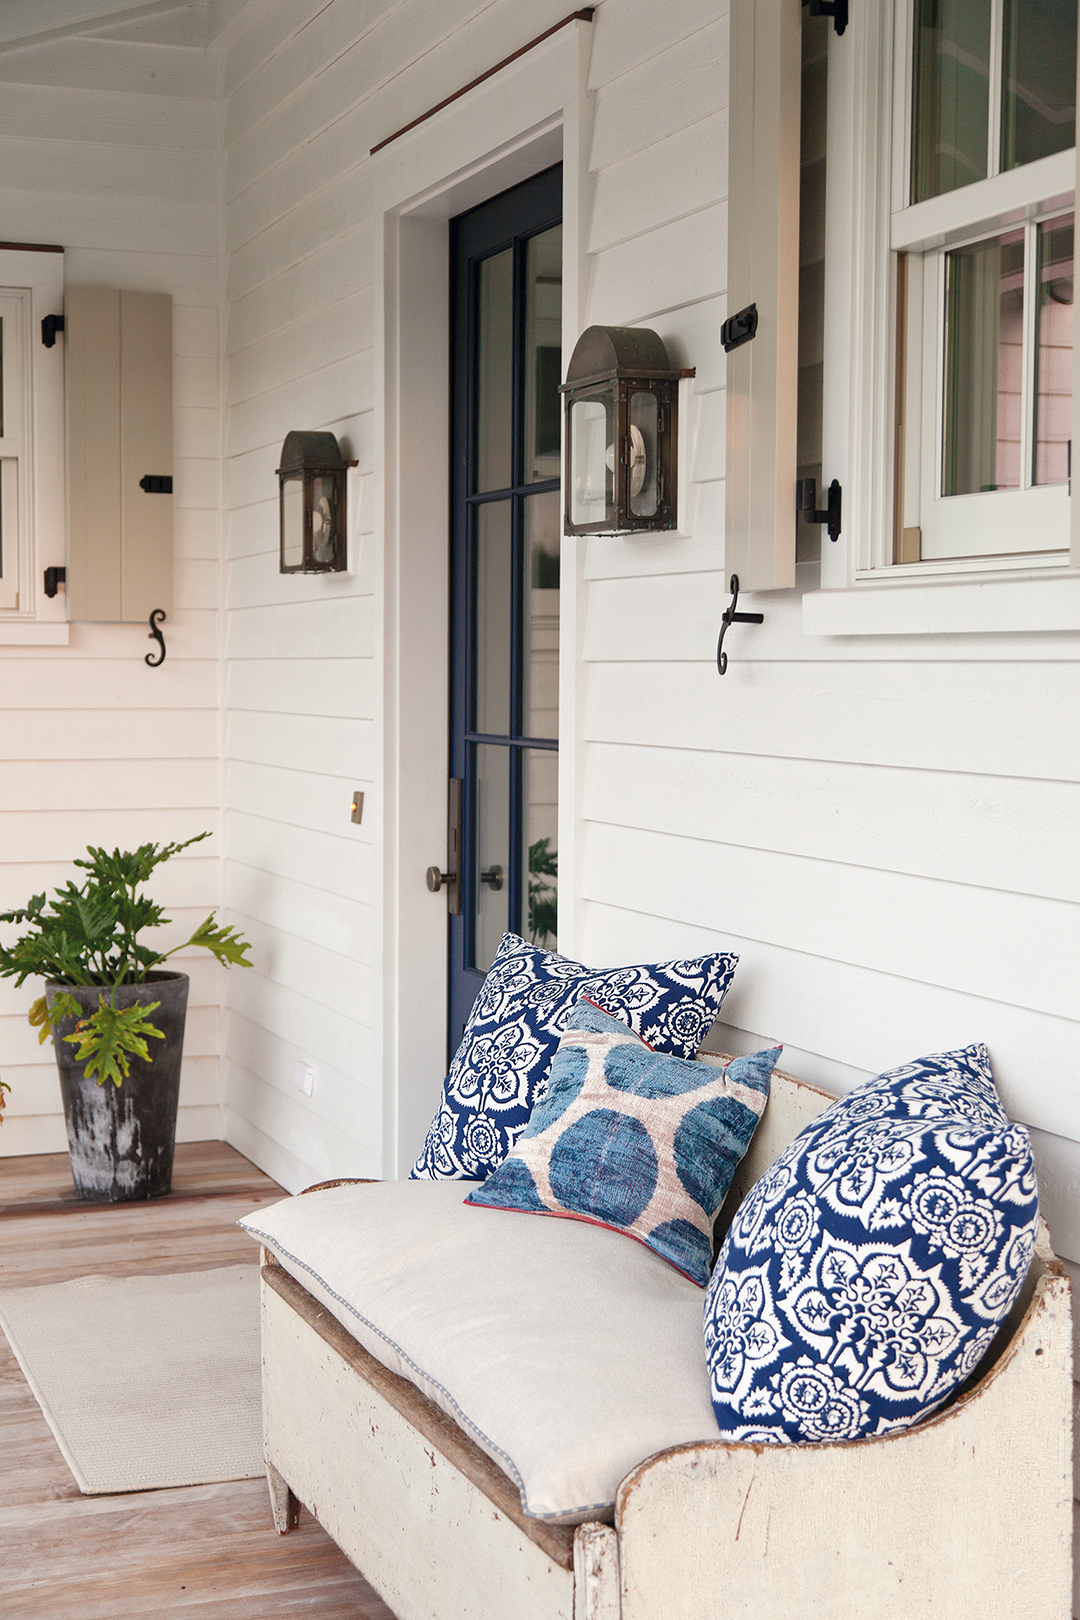 Pillows made from vintage textiles add a pop of color to the porch.